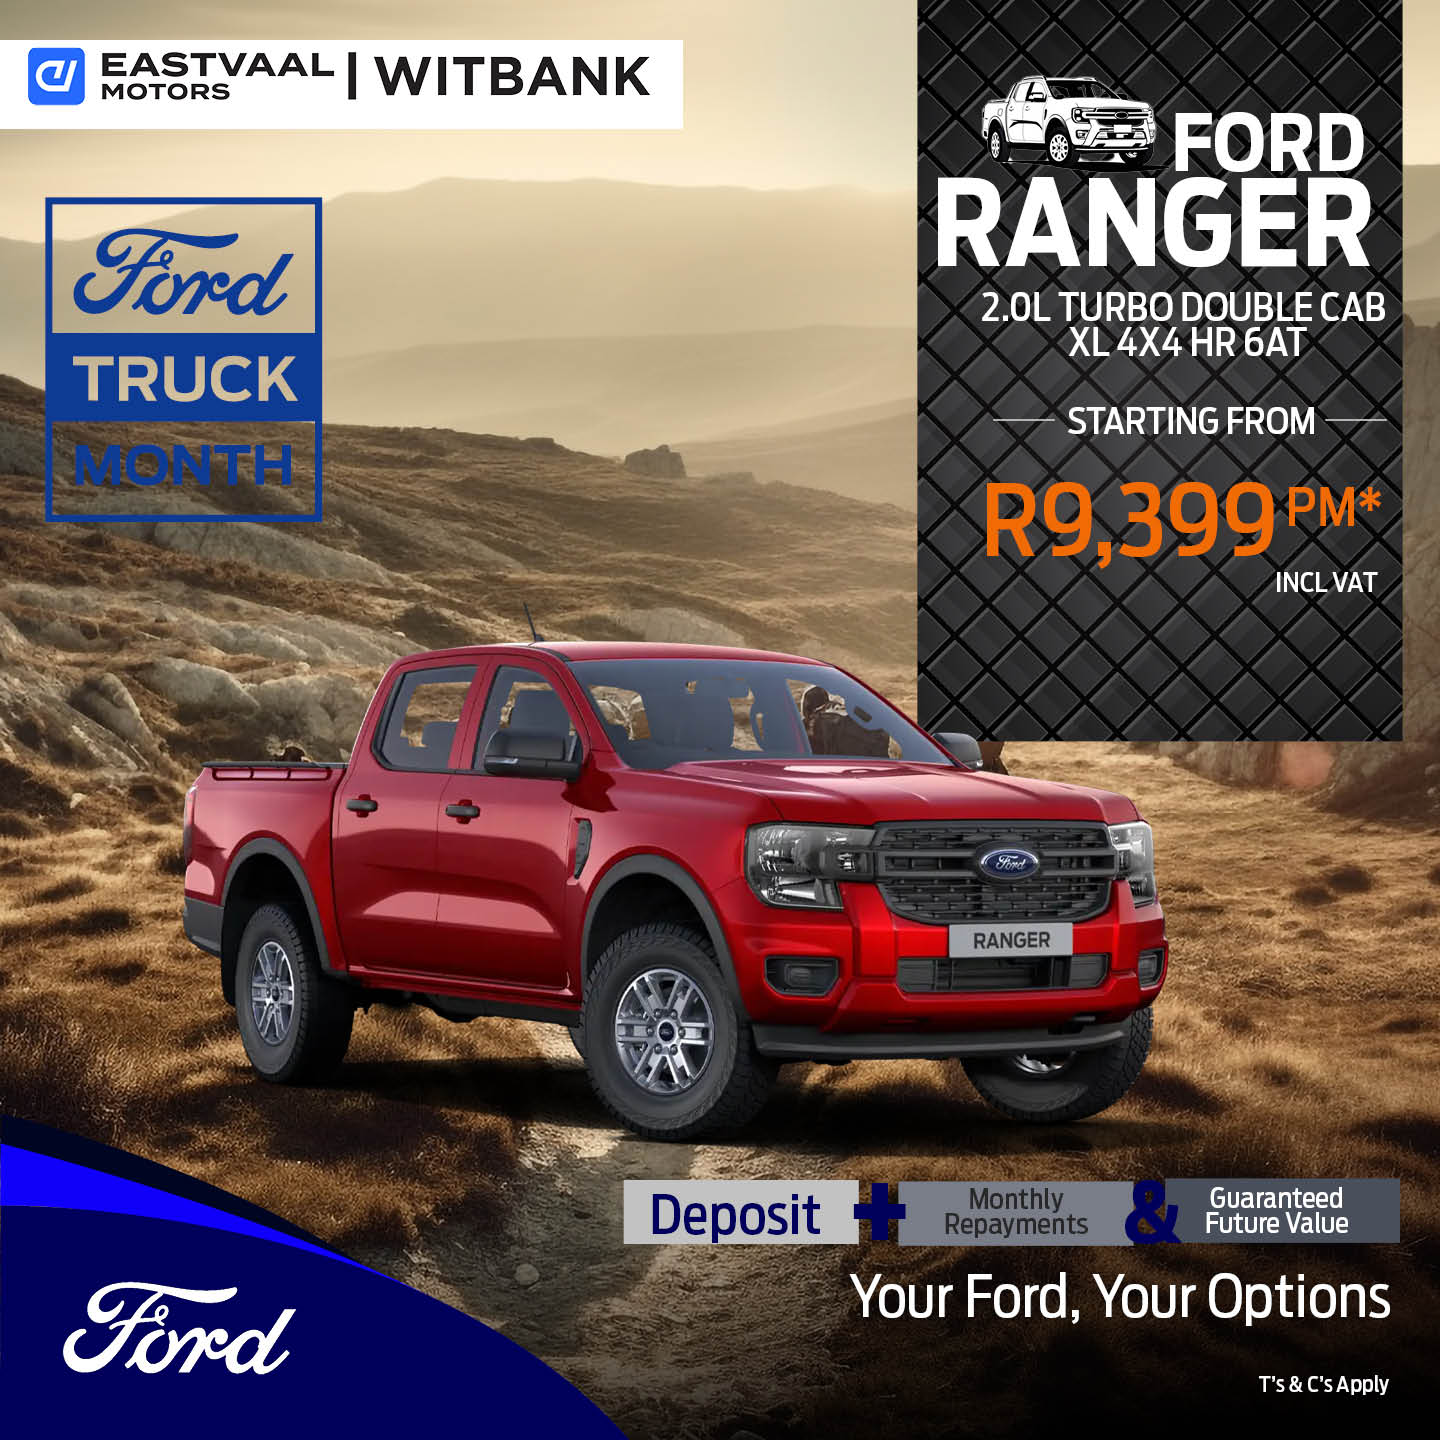 Truck month is here! Ford Ranger 2.0L Turbo D/C XL 4×4 HR 6AT image from Eastvaal Motors